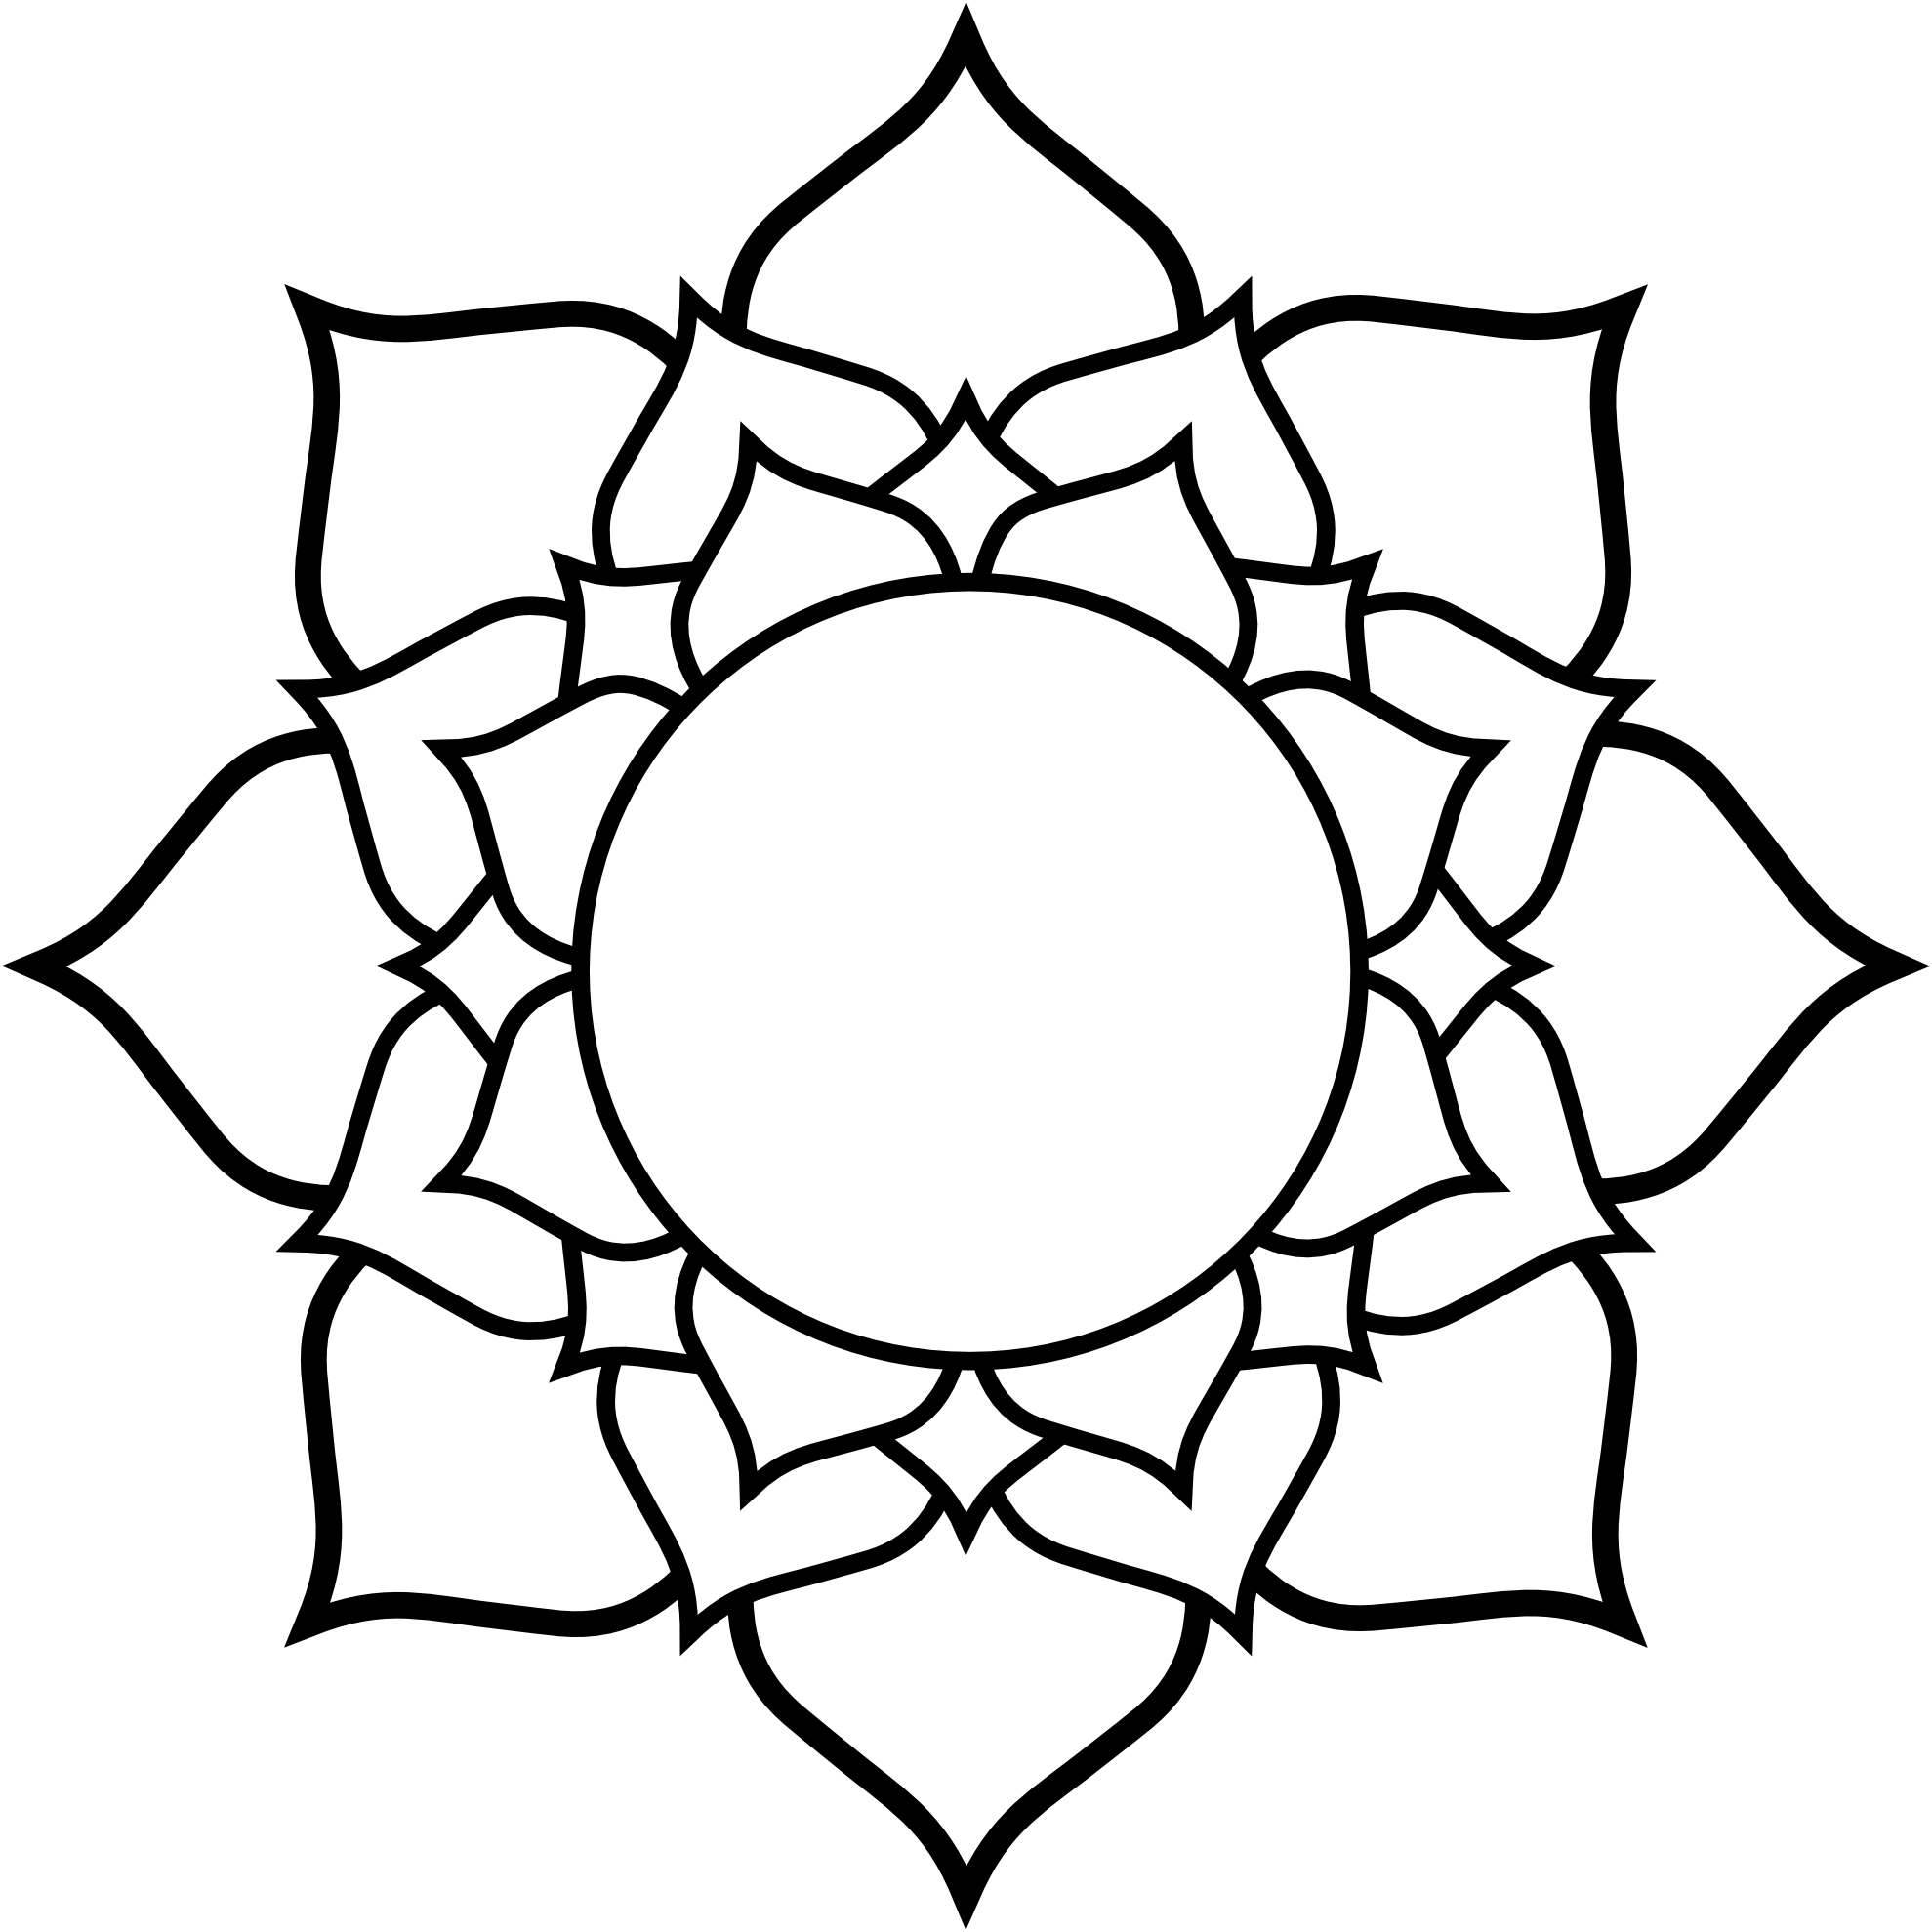 lotus clipart coloring page